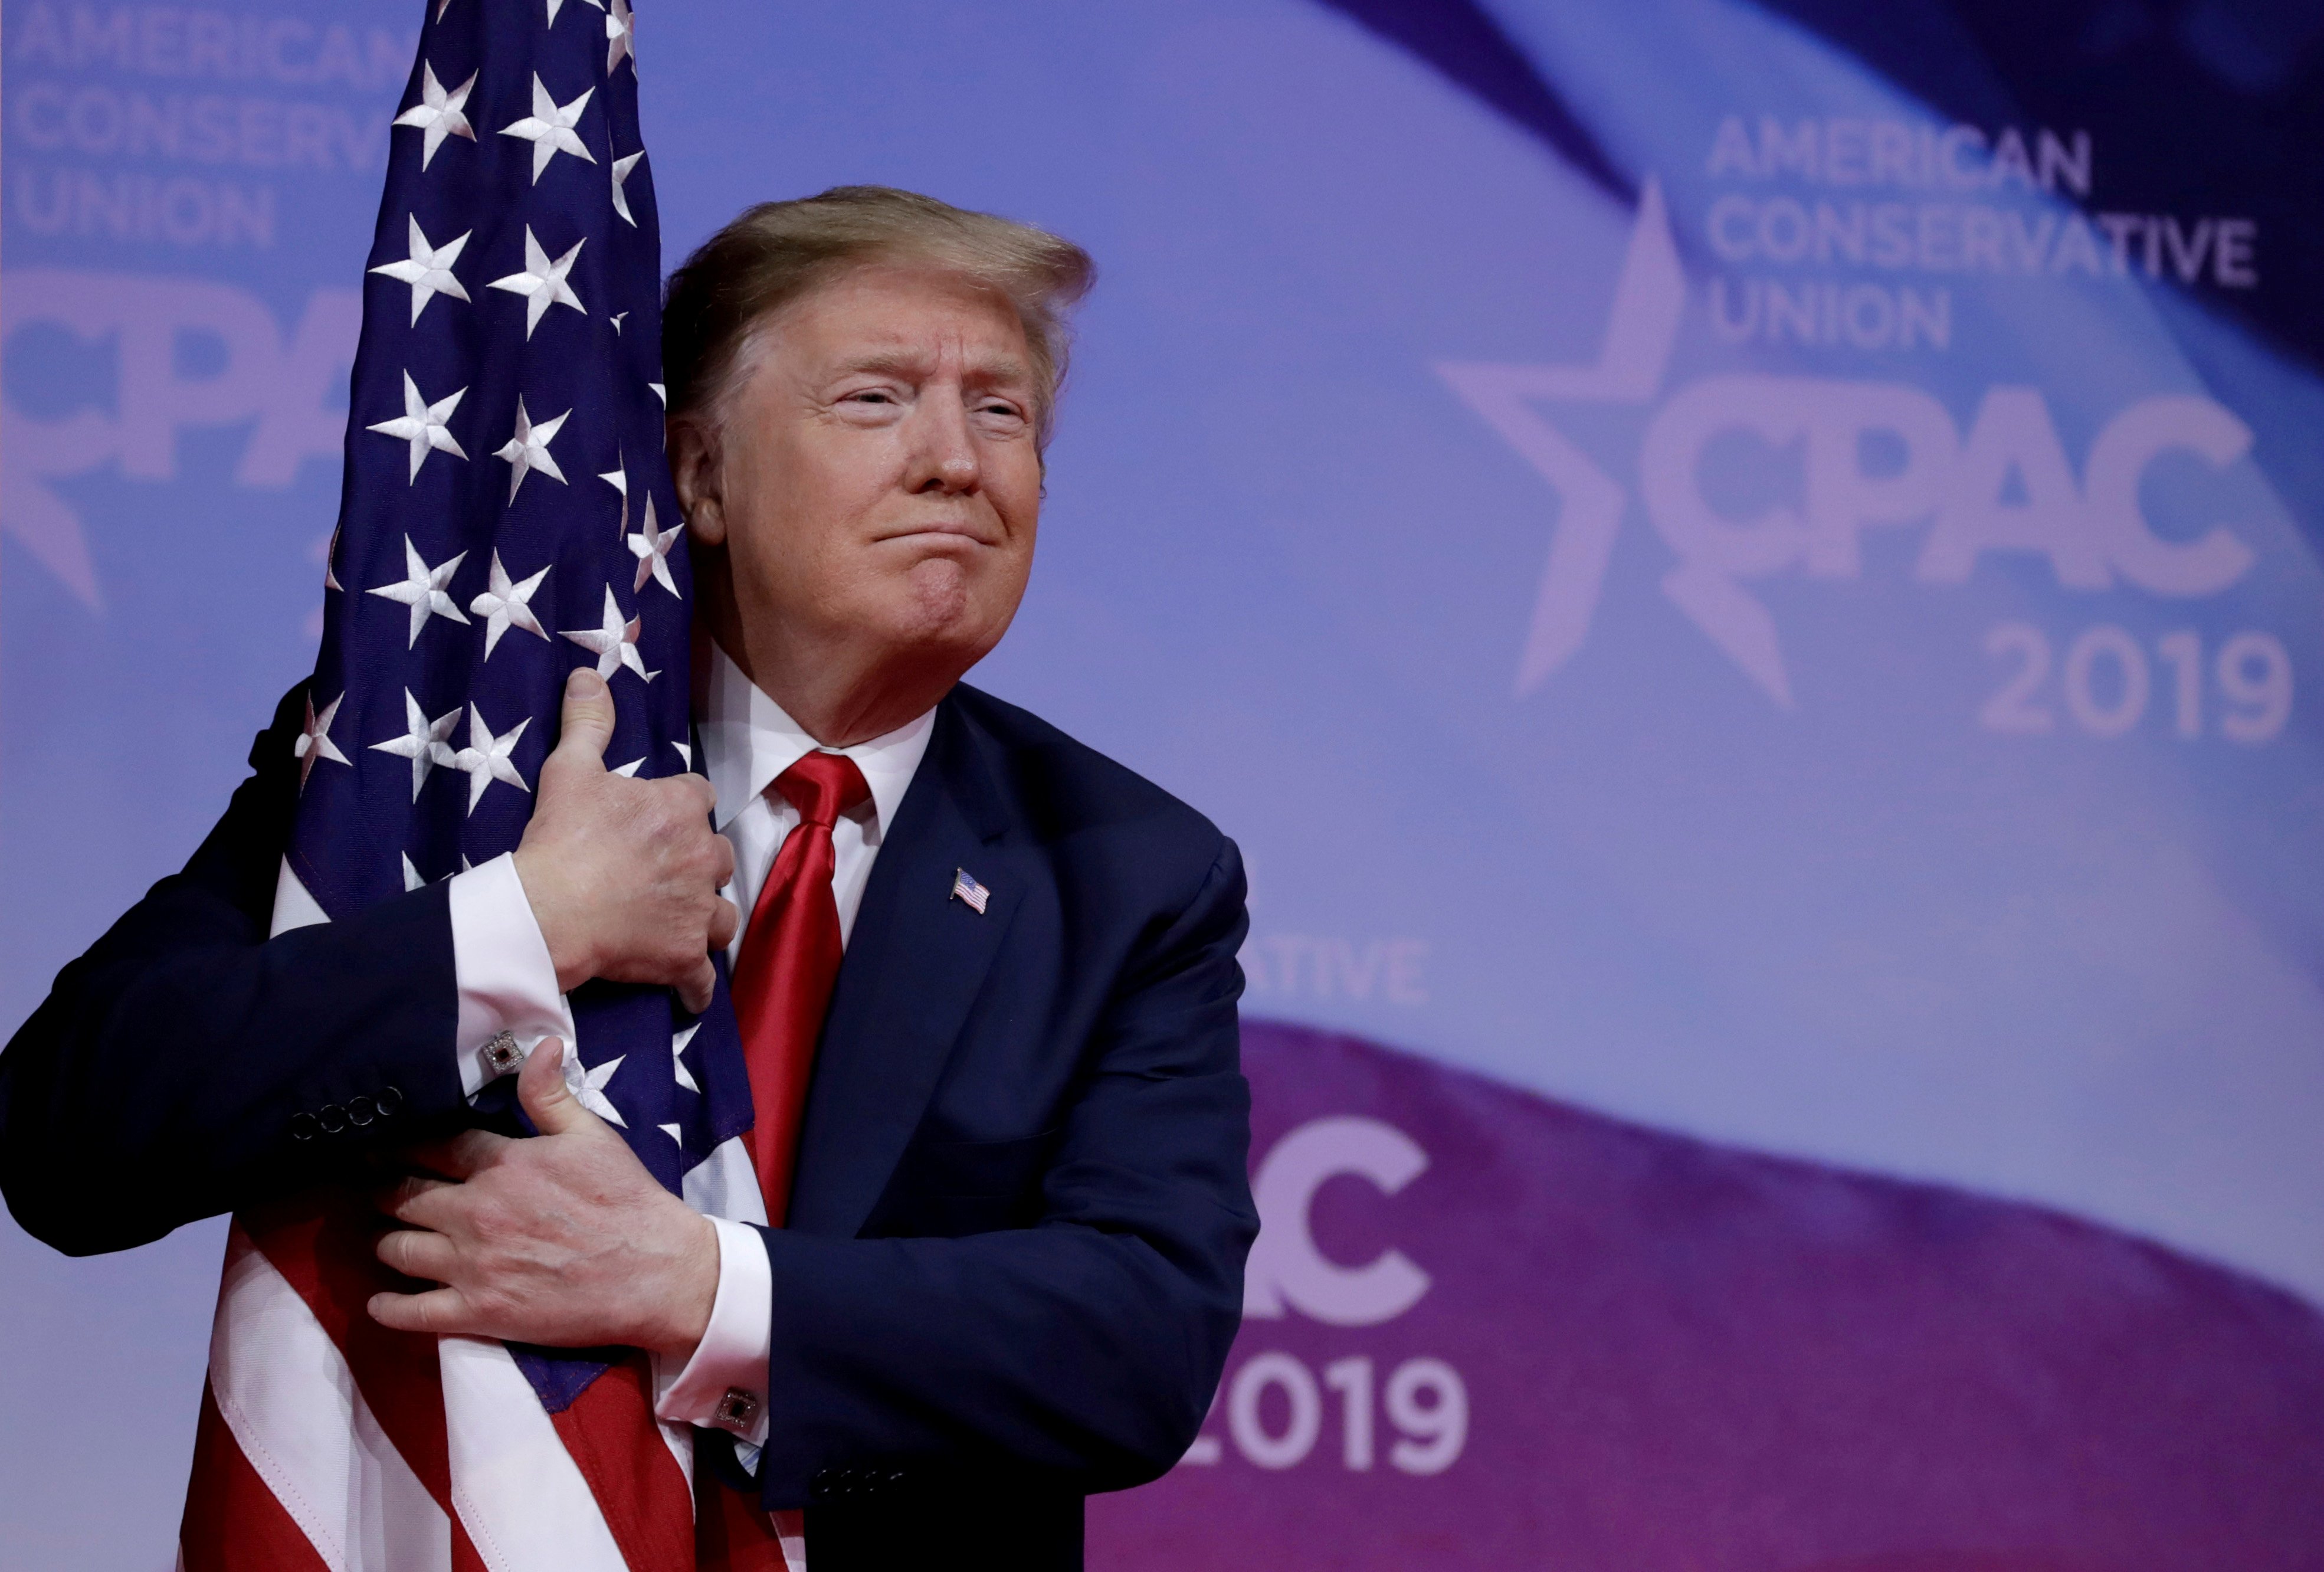 U.S. President Donald Trump hugs American flag at the Conservative Political Action Conference (CPAC) annual meeting at National Harbor near Washington, U.S., March 2, 2019. REUTERS/Yuri Gripas 